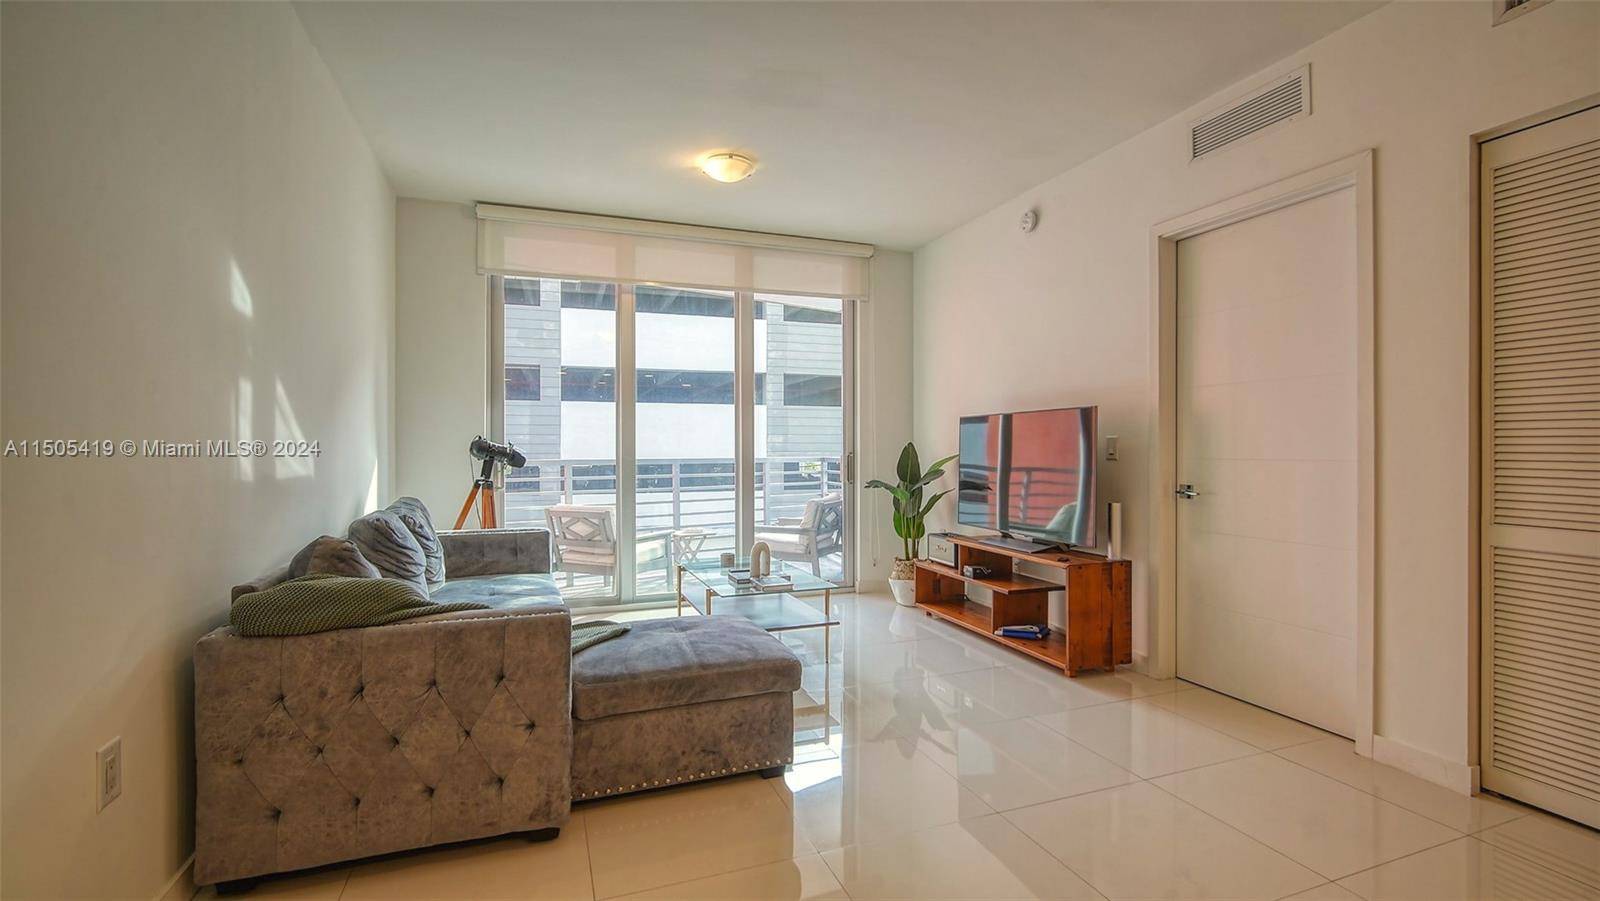 Discover the perfect blend of comfort and convenience in this exceptional 1 bedroom, 1.